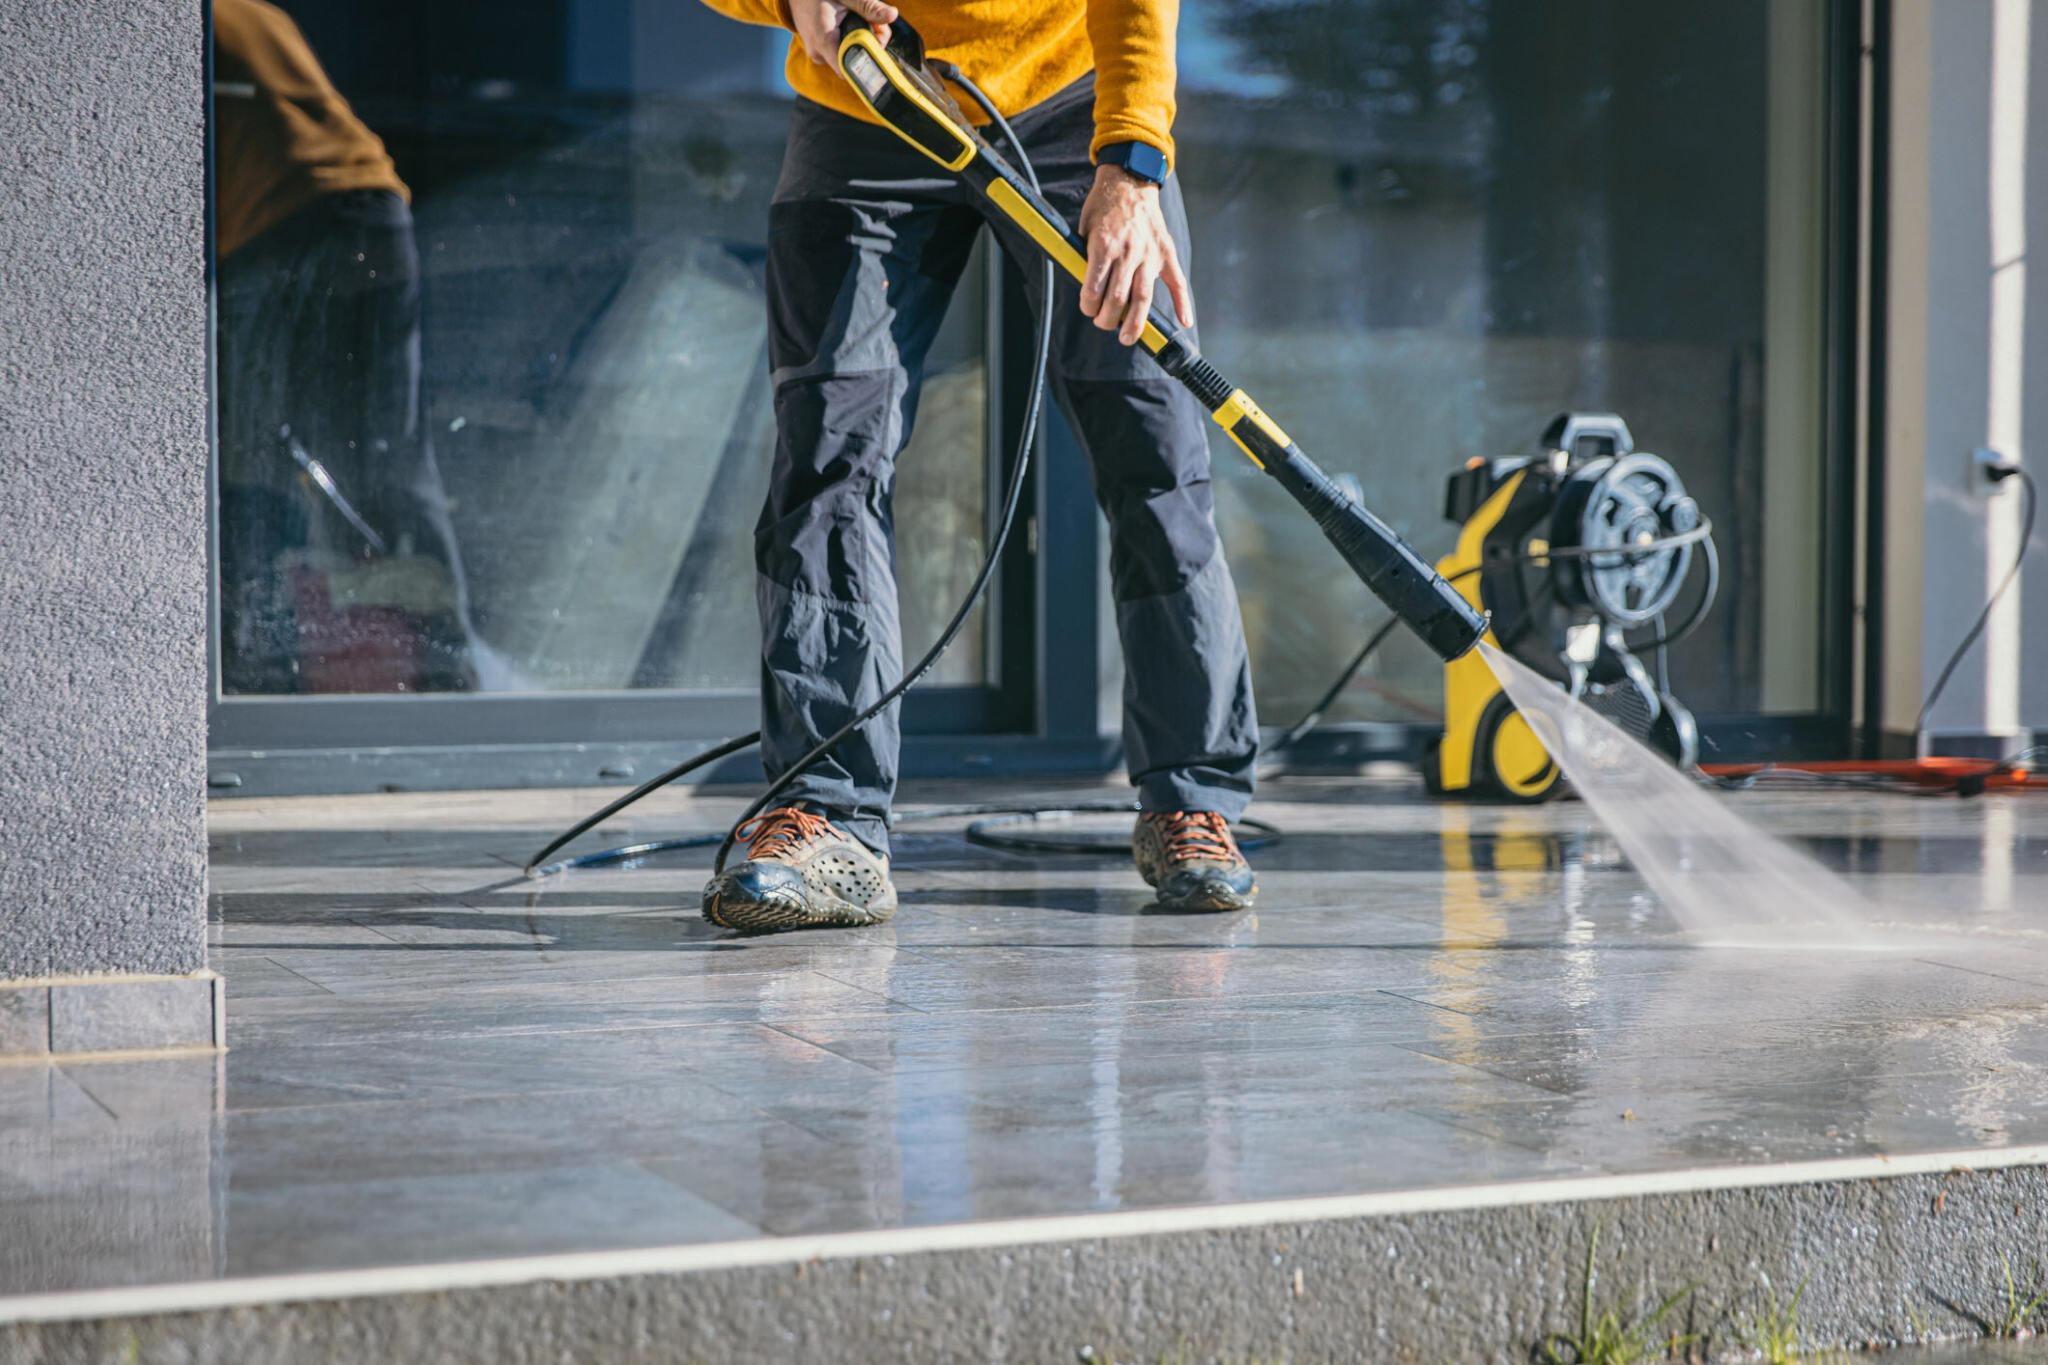 First in Pressure Washing Introduces Eco-Friendly Cleaning Solutions